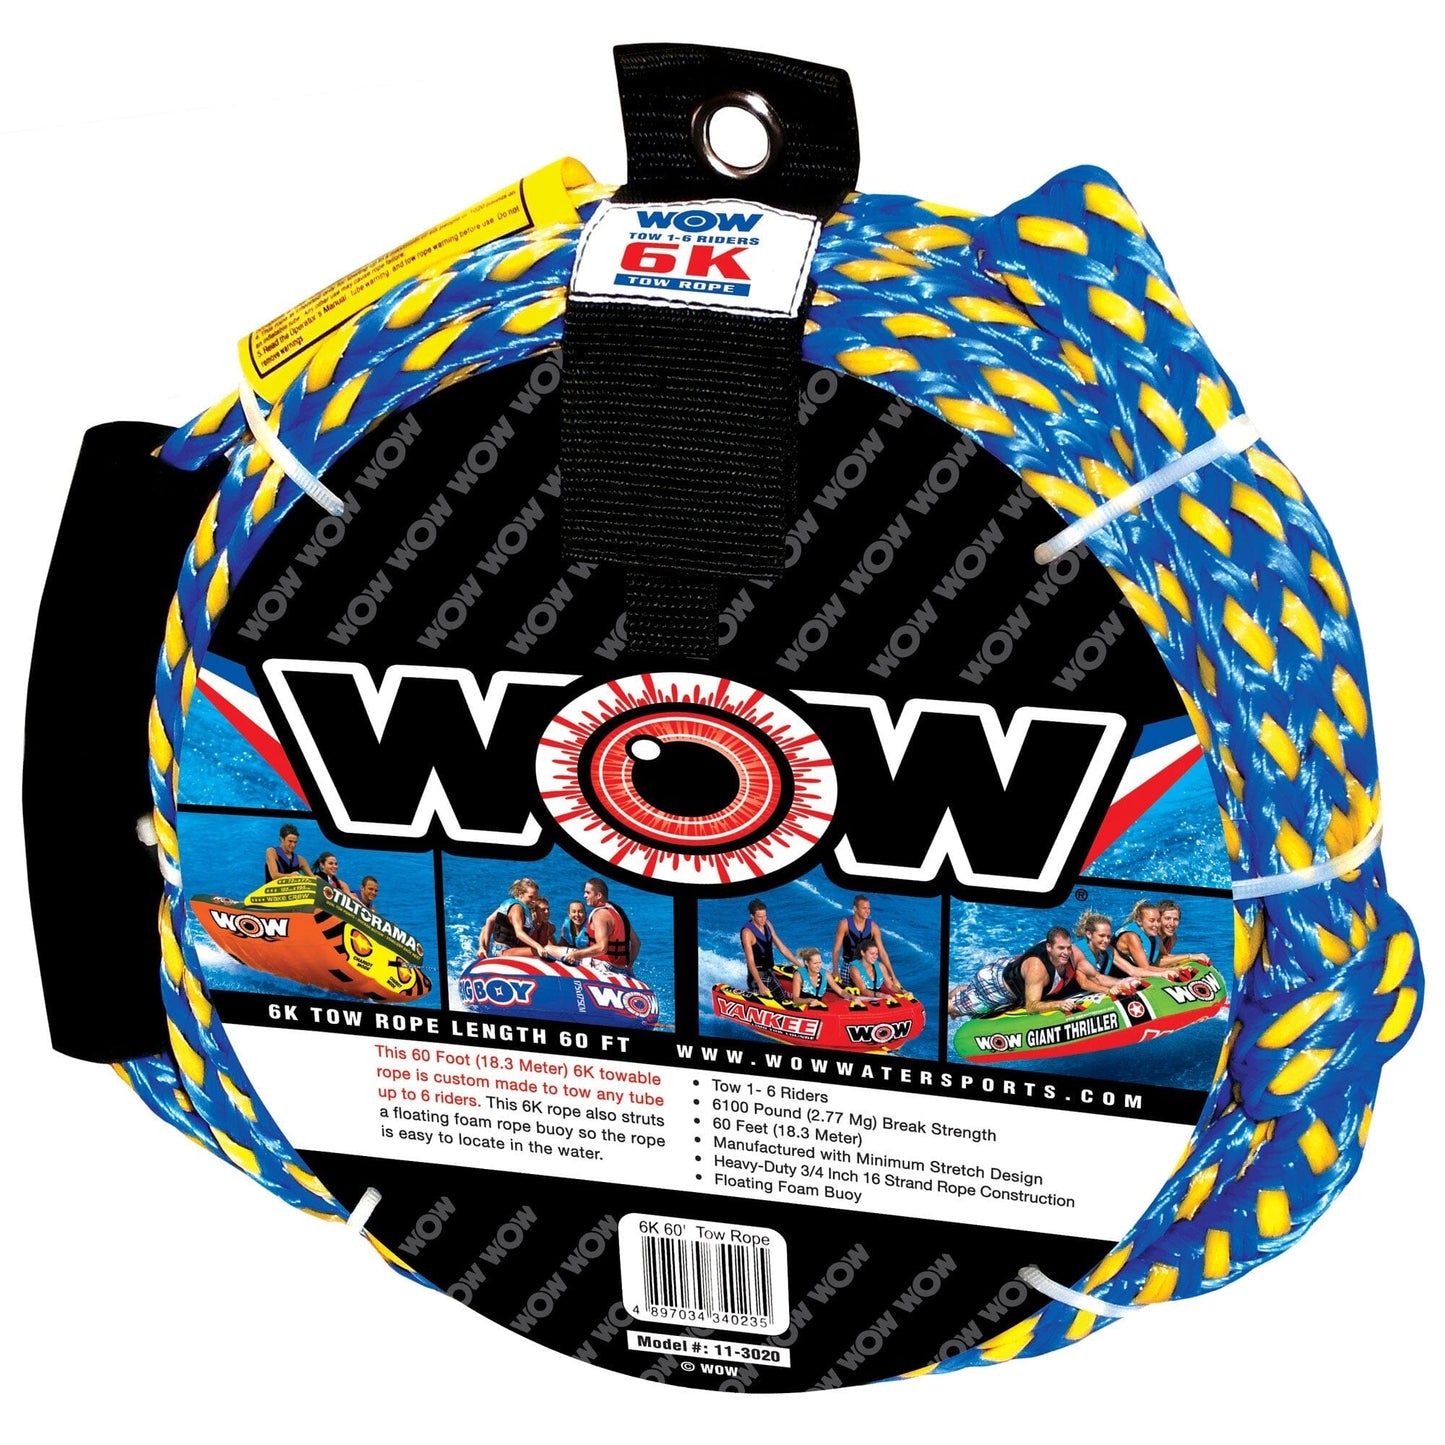 Wow Watersports 11-3020 6K - 60' Tow Rope